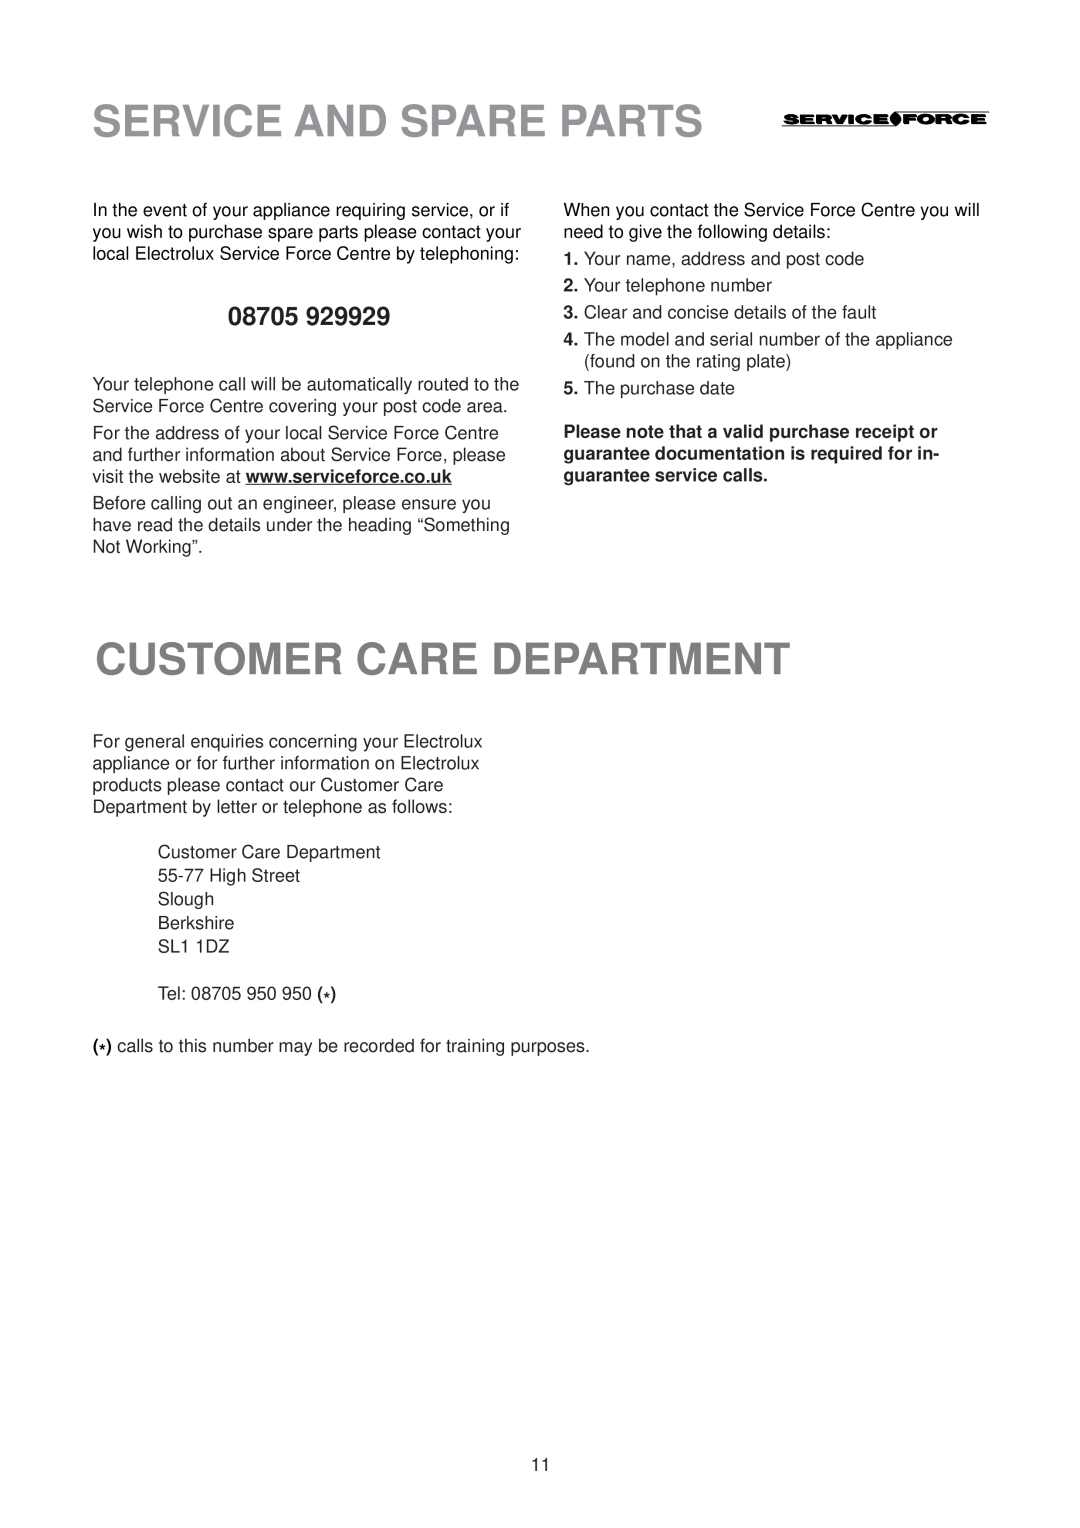 Electrolux EU 6233 manual Service And Spare Parts, Customer Care Department 